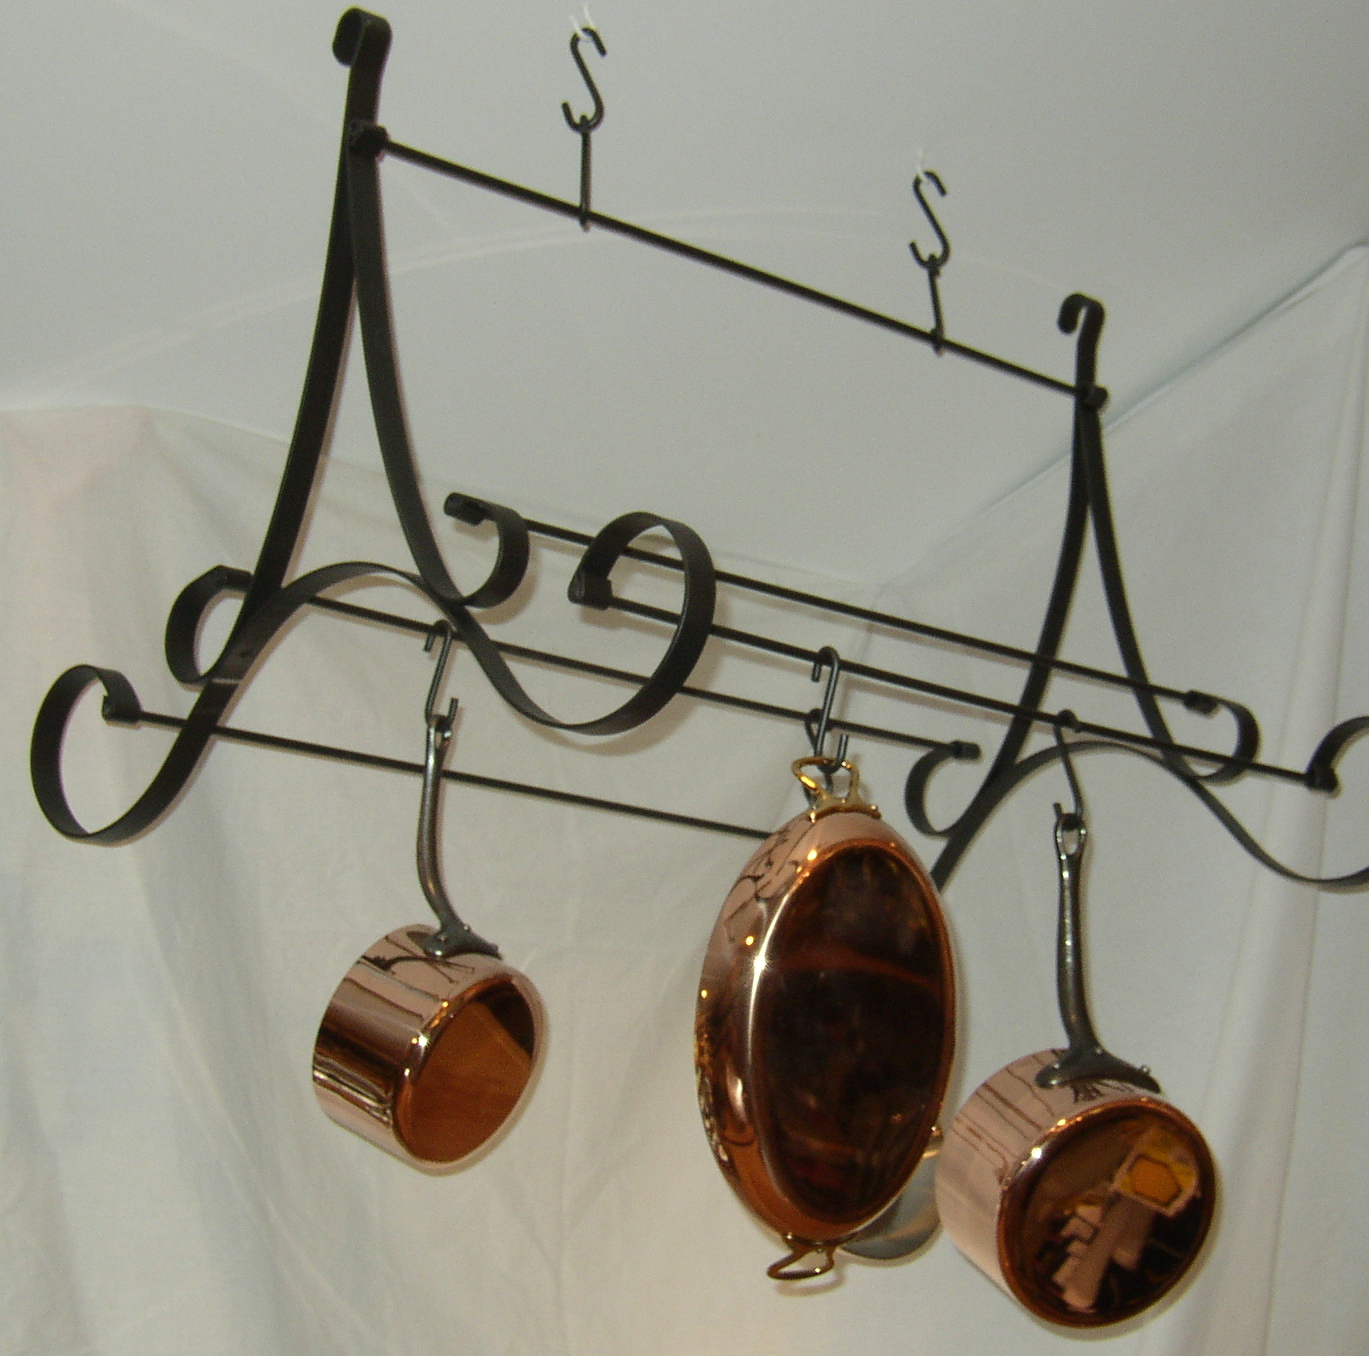 Functional and decorative pot racks to display and store cookware.